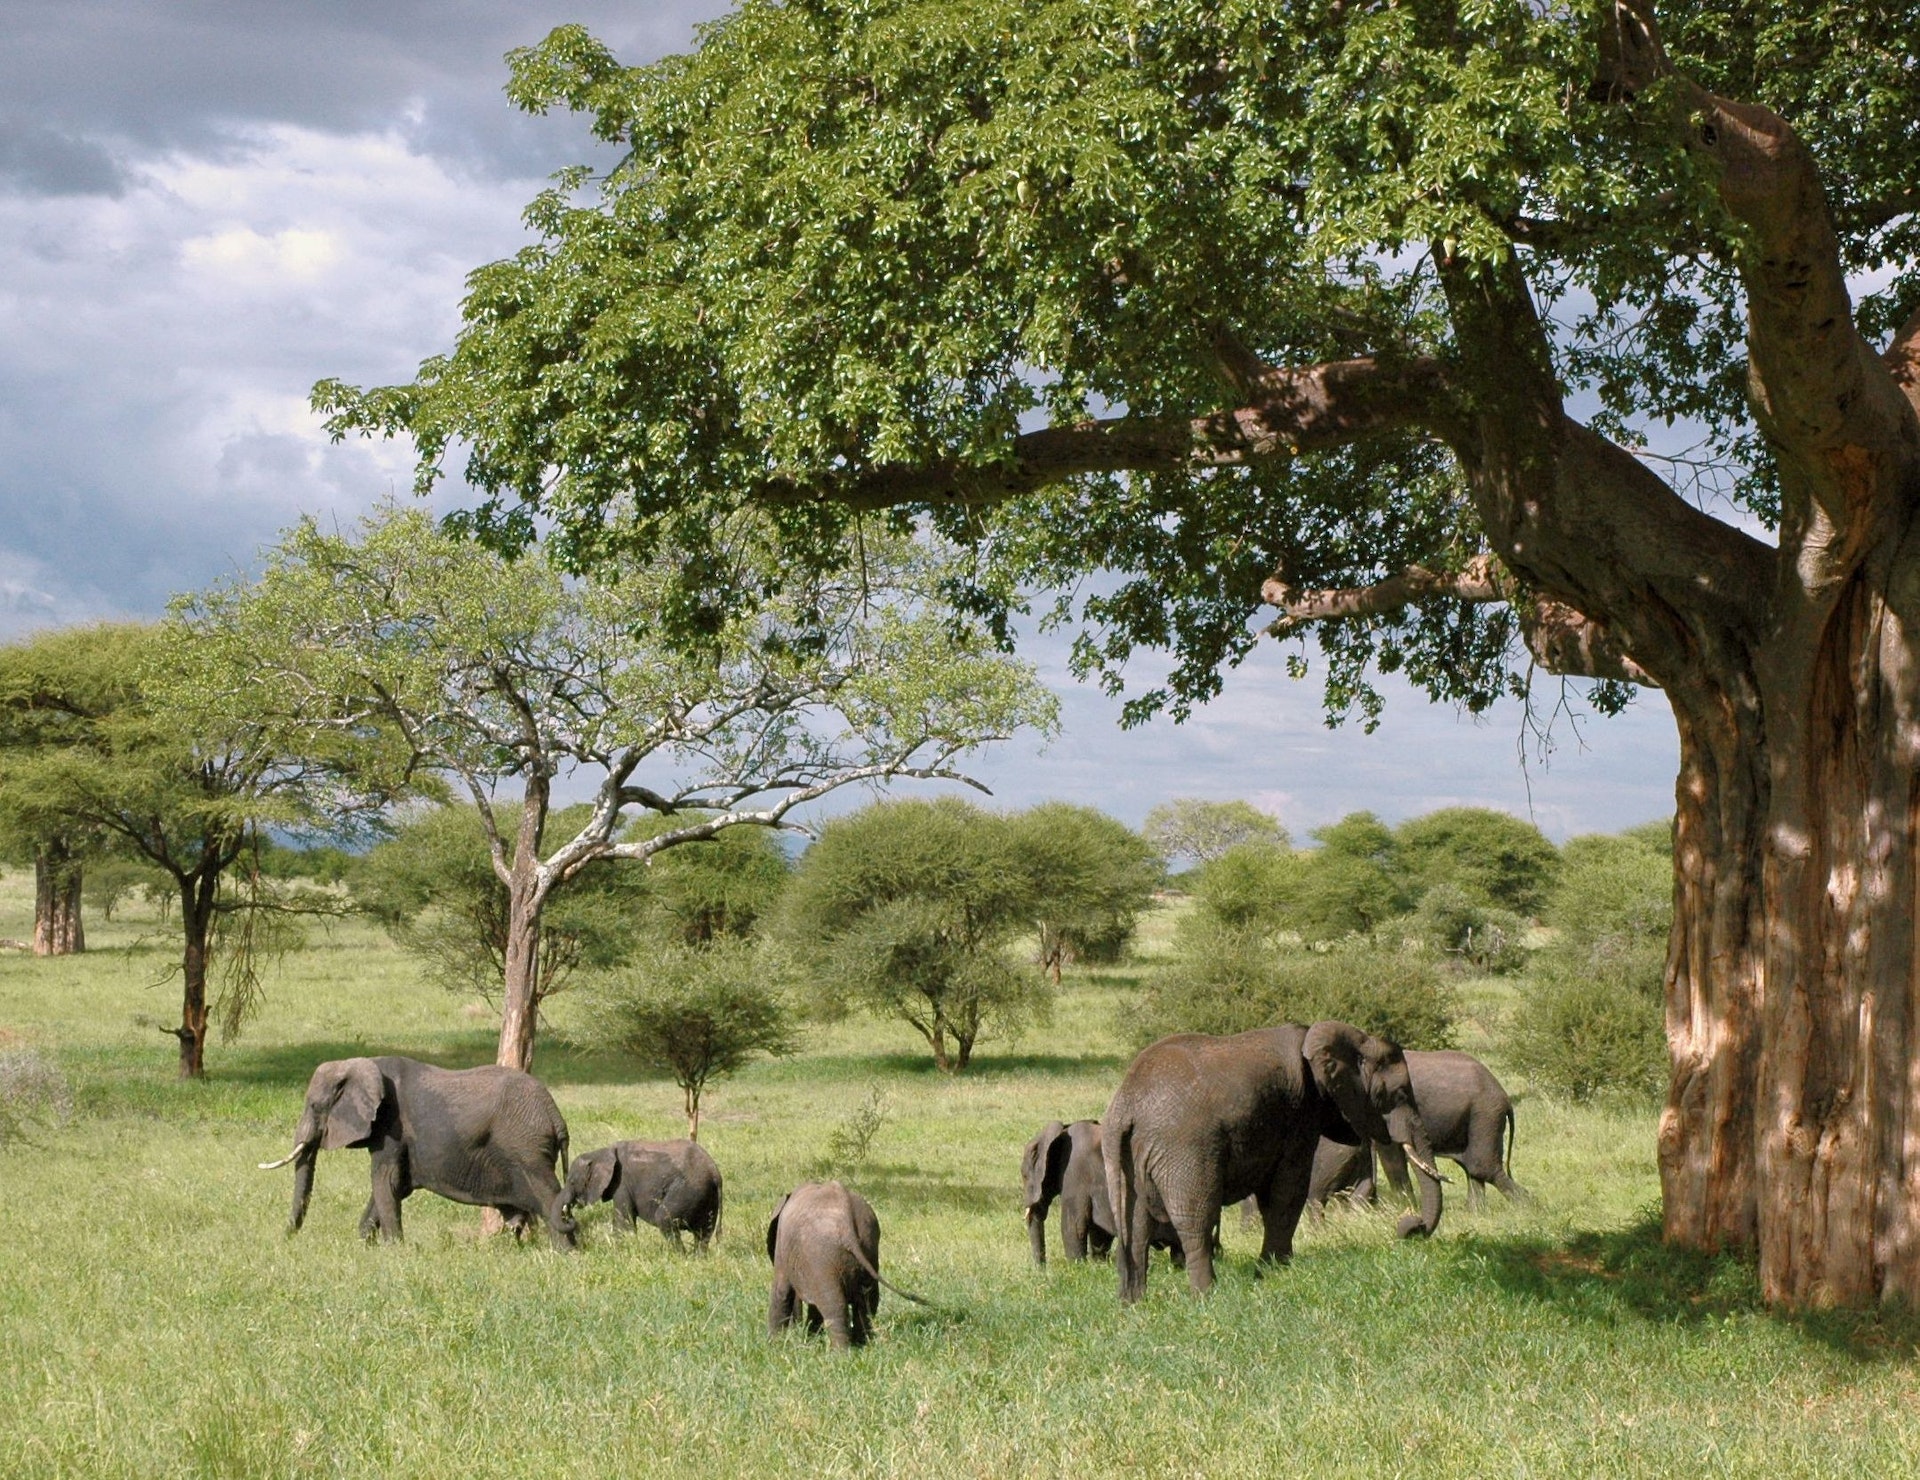 Wildlife Safaris In The Serengeti - Tips And Recommendations For Unforgettable Encounters